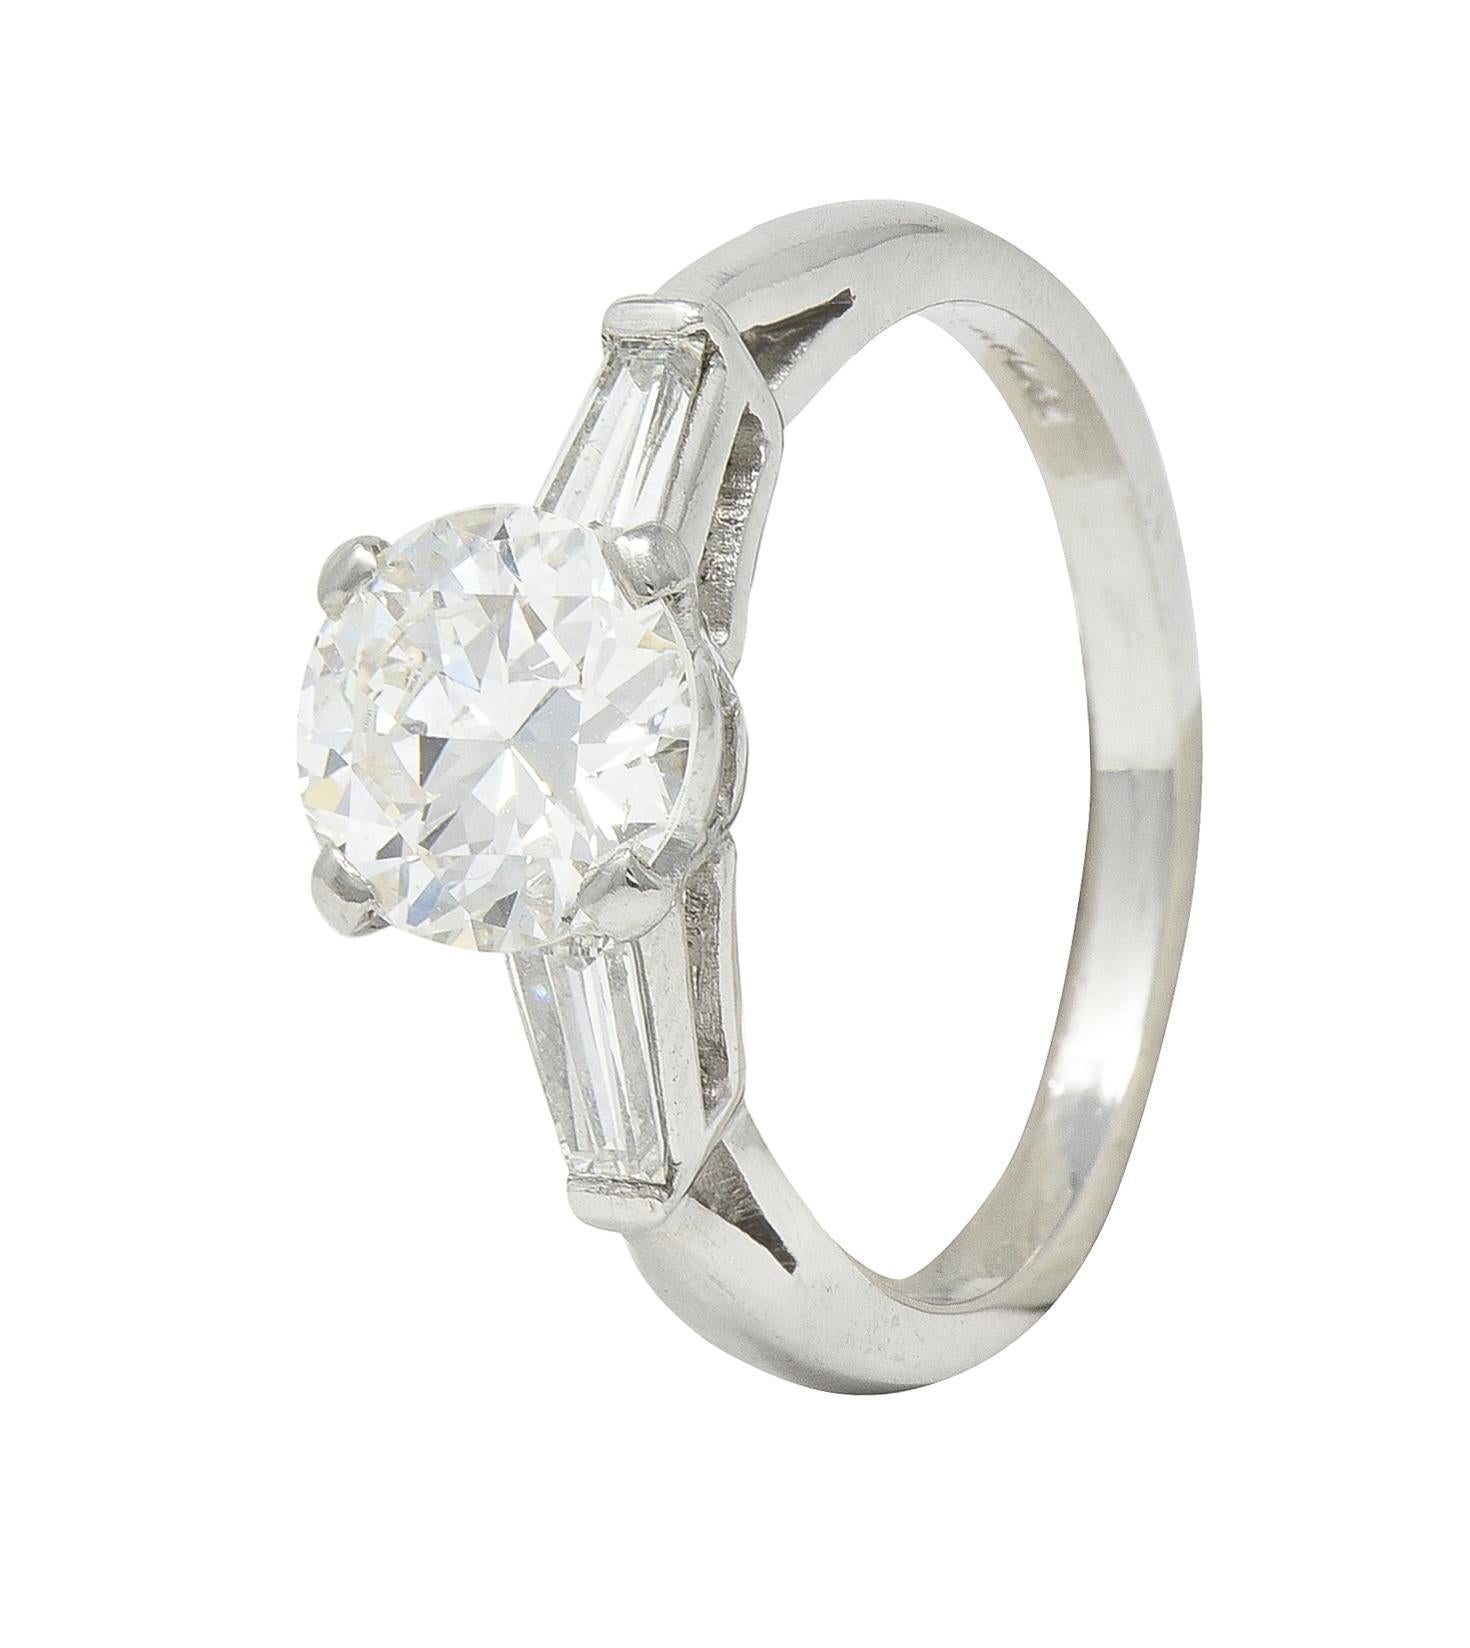 Ring centers a prong set round transitional cut diamond weighing 1.15 carat total - I color with SI2 clarity
Flanked by cathedral shoulders bar set with tapered baguette cut diamonds
Weighing approximately 0.30 carat total - I color with SI2